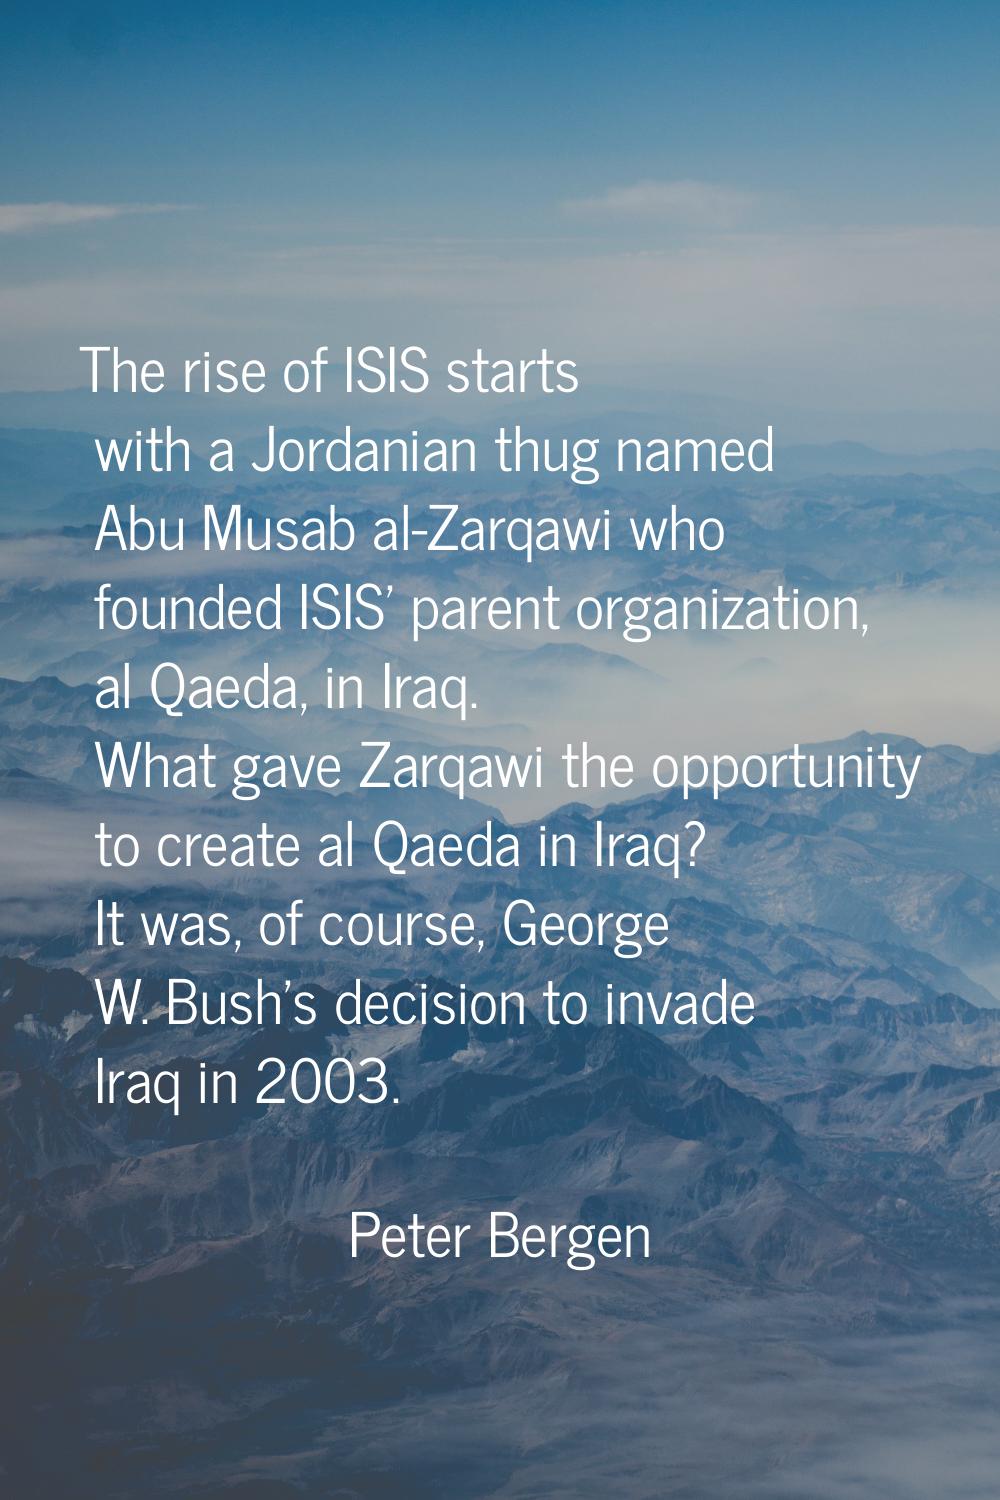 The rise of ISIS starts with a Jordanian thug named Abu Musab al-Zarqawi who founded ISIS' parent o